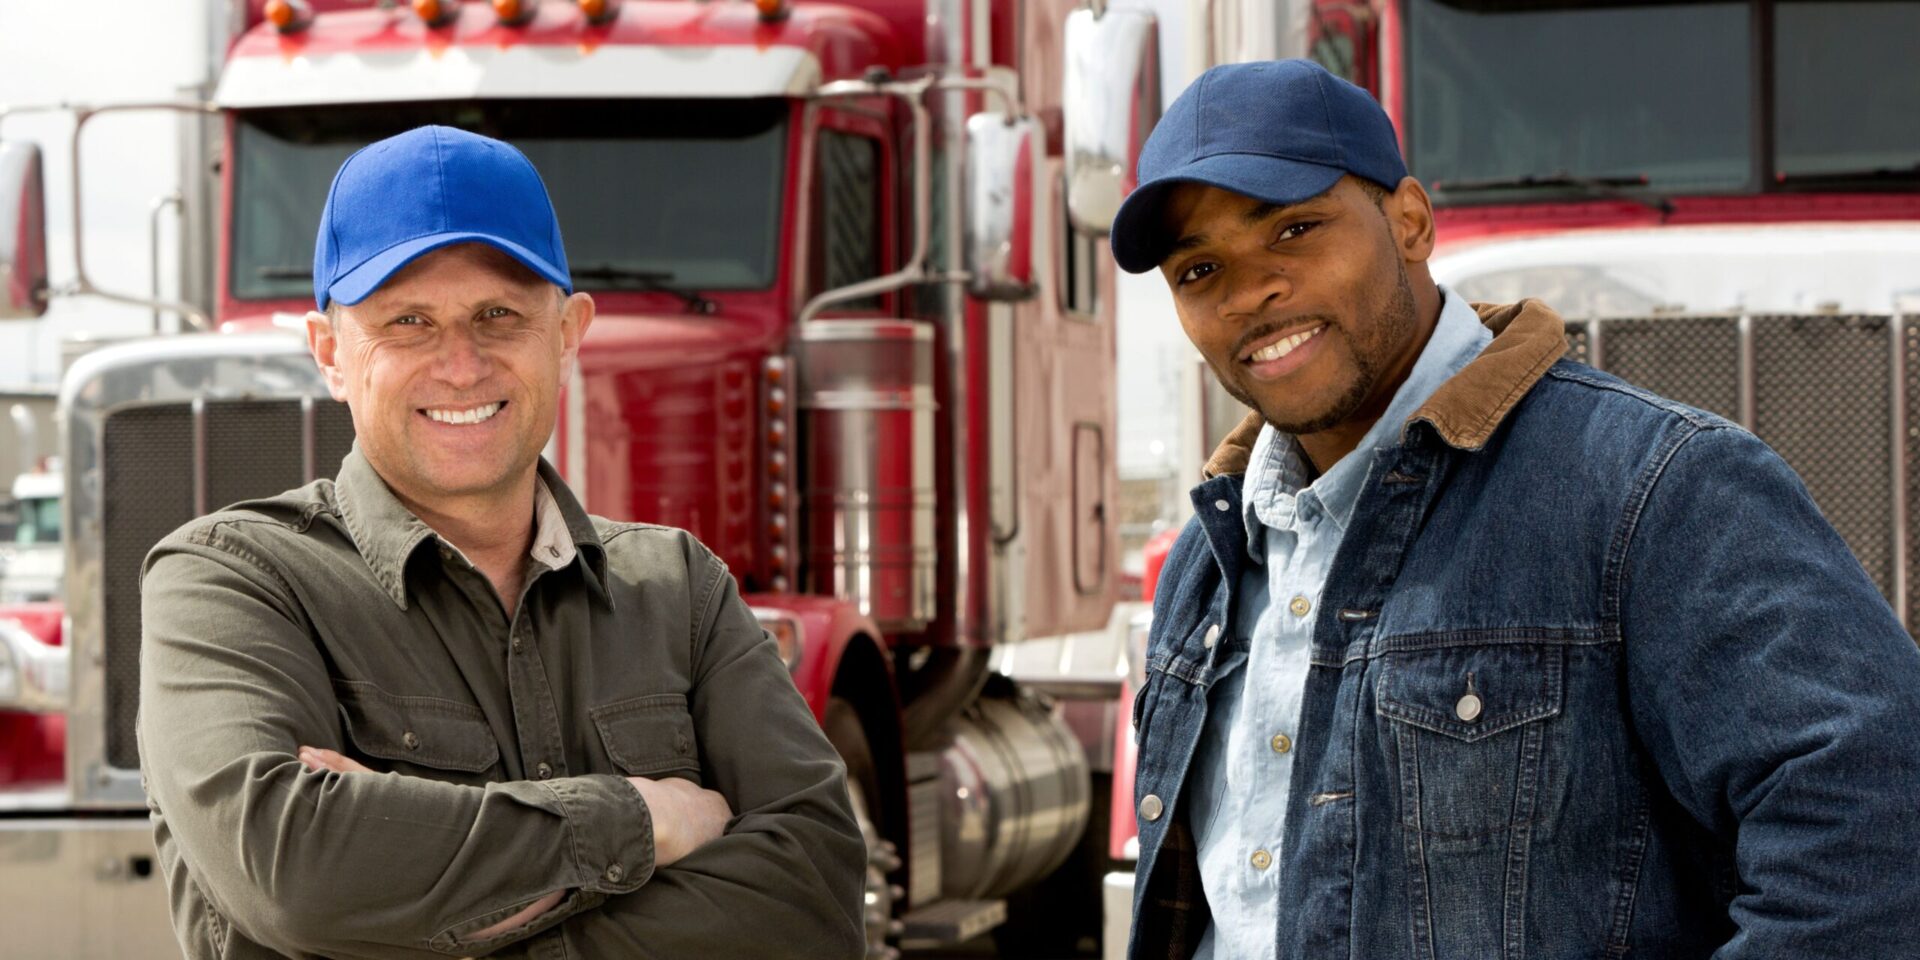 How to Start a Trucking Business